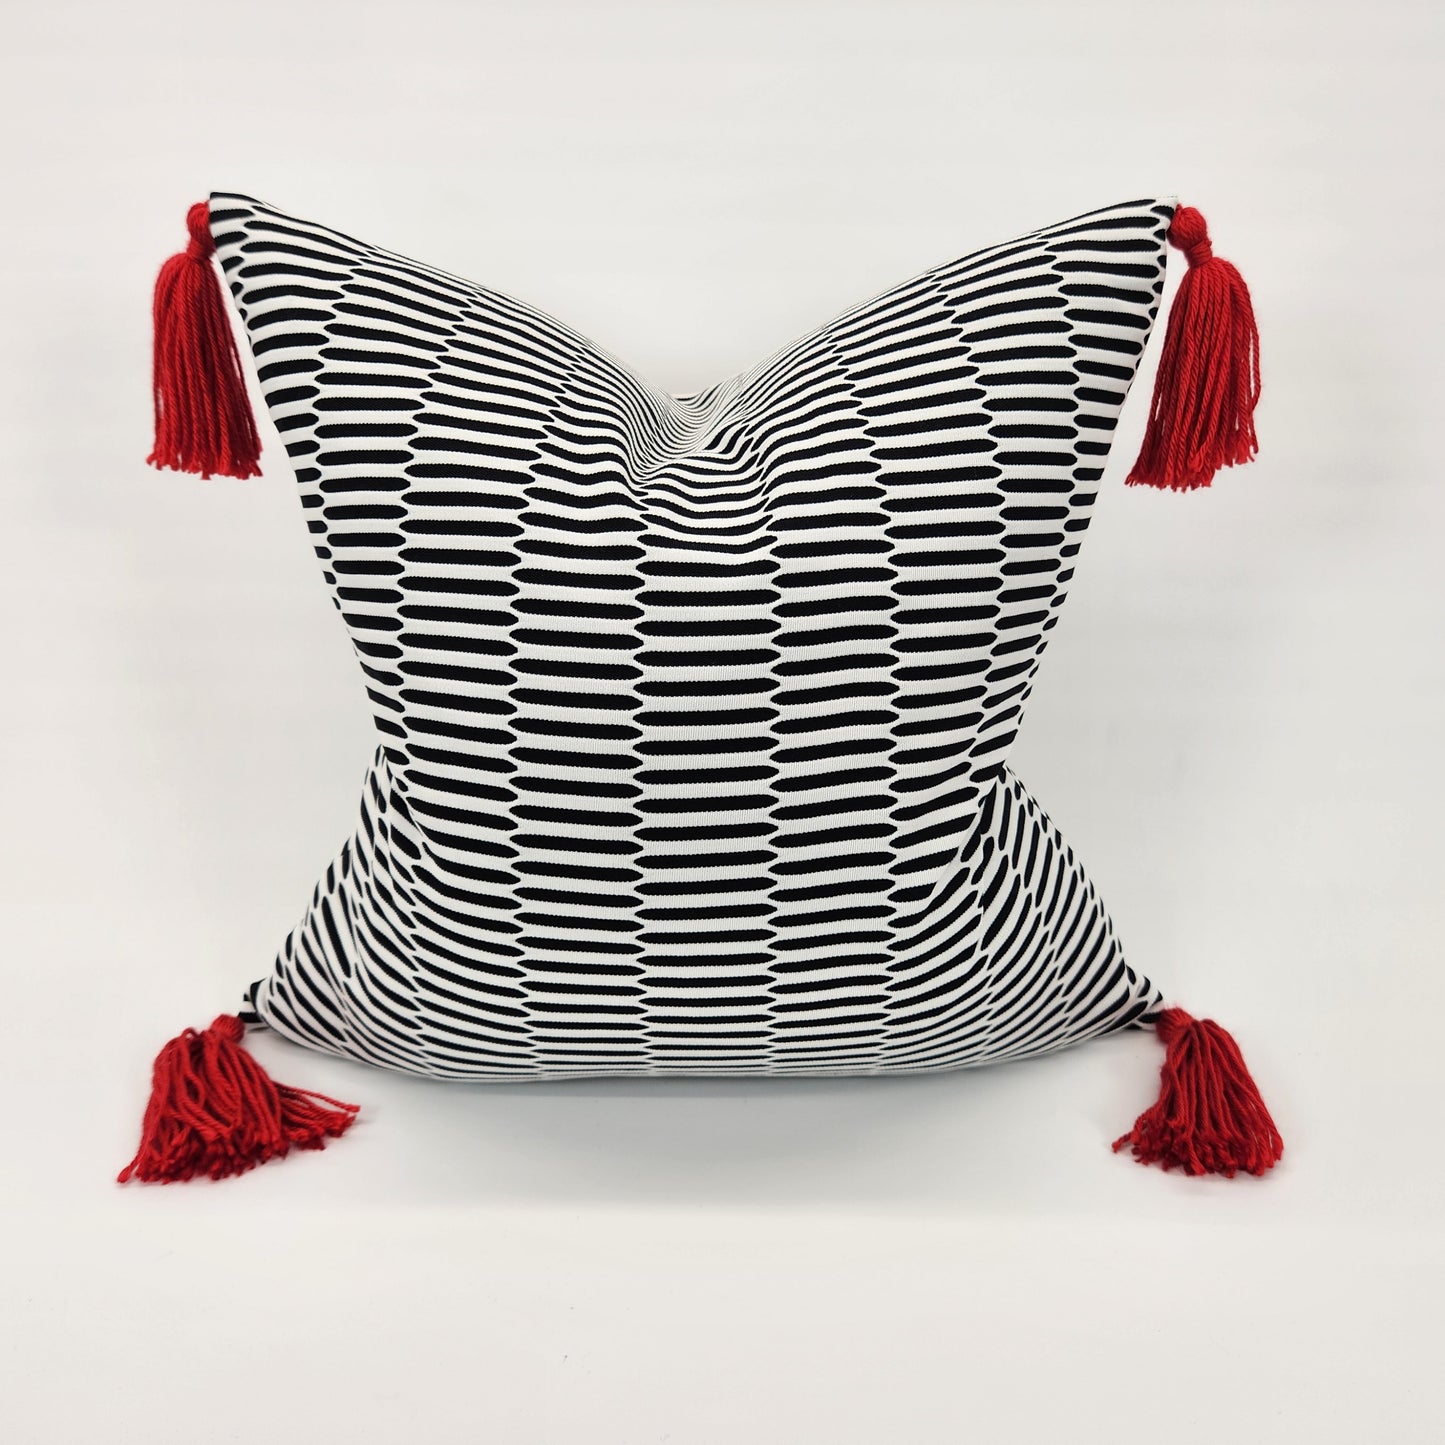 Vintage 1970s Black & White Double Knit Pillow with Red Tassels 20"